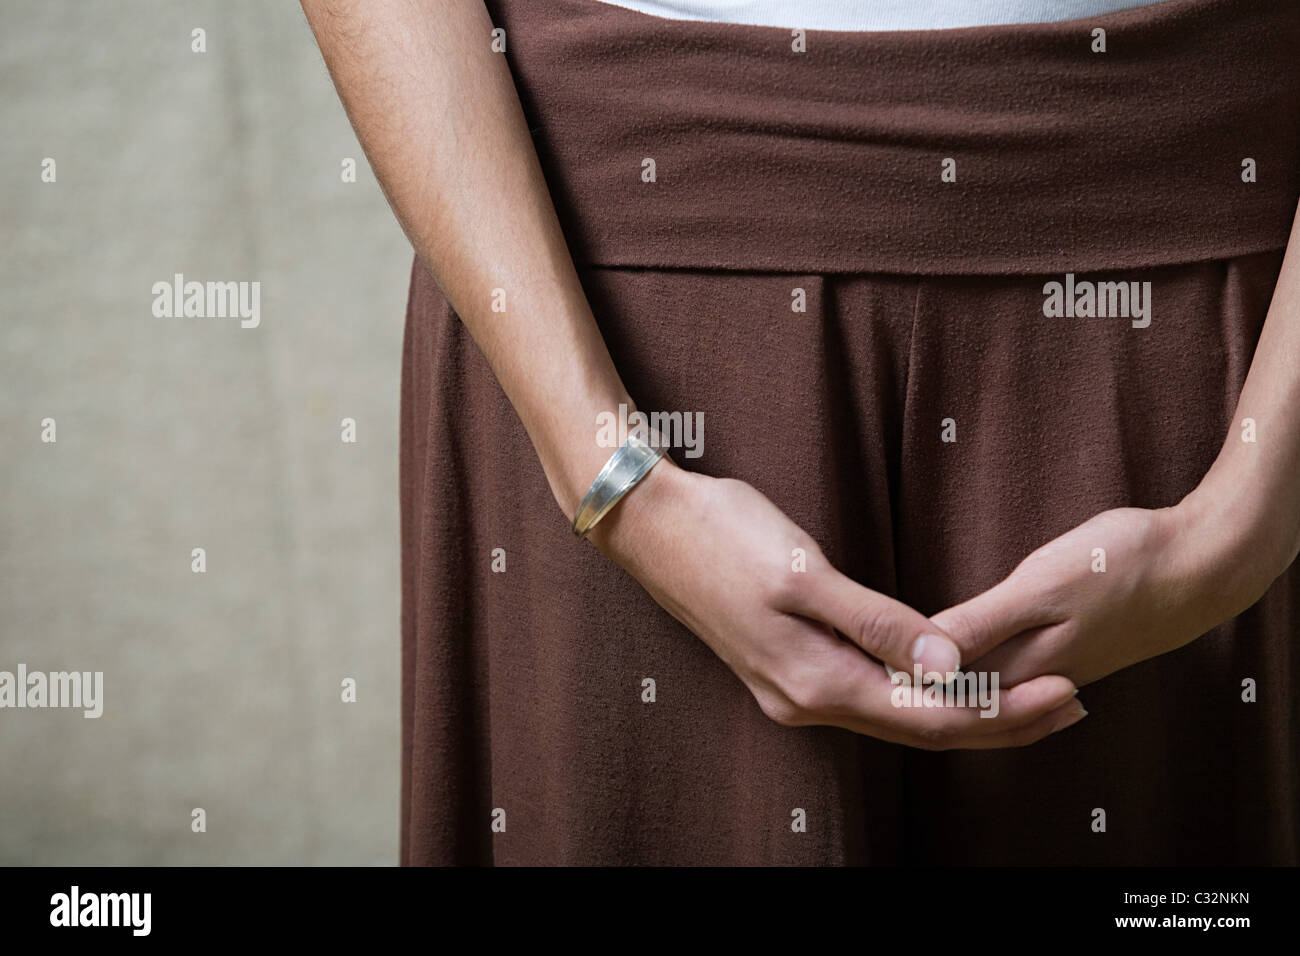 Woman with hands clasped, close up Stock Photo